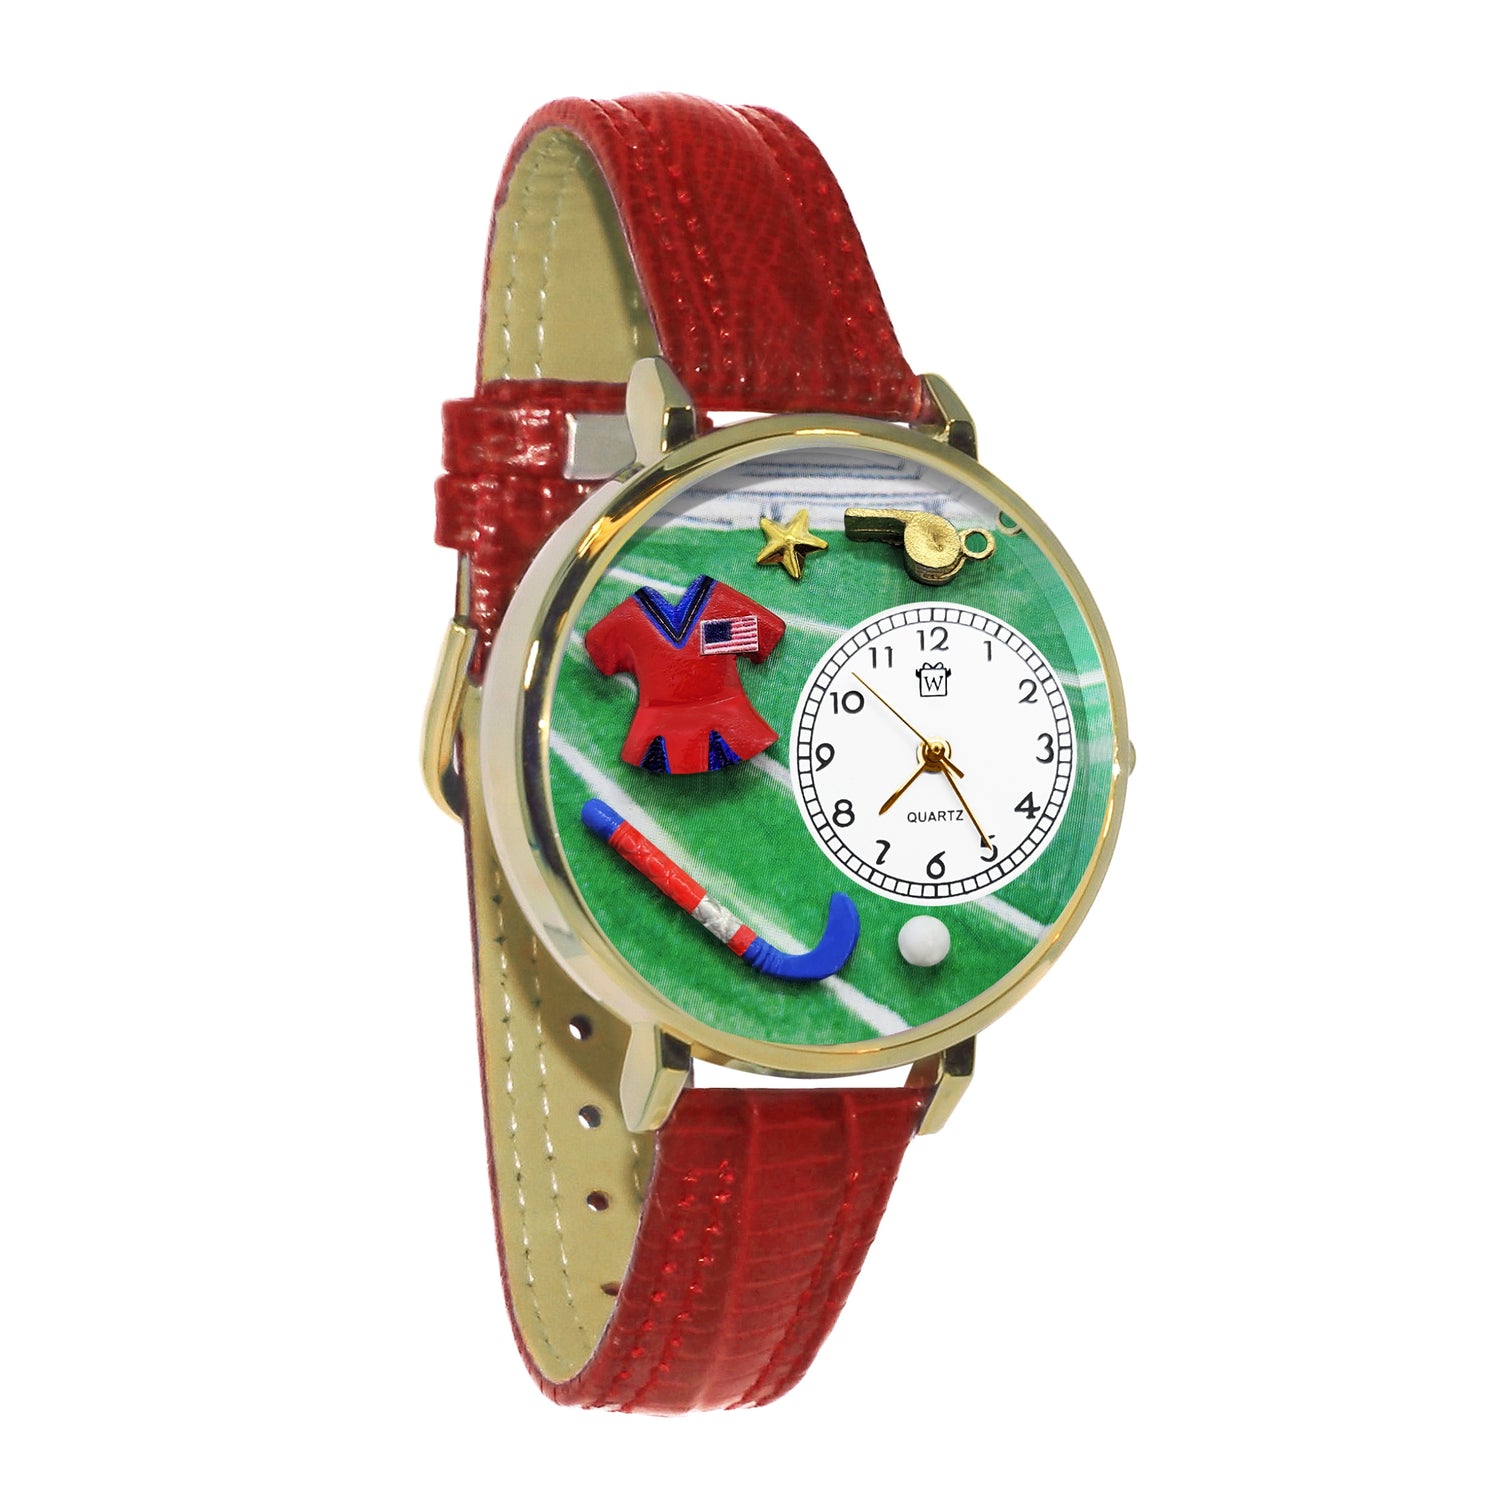 Whimsical Gifts | Field Hockey 3D Watch Large Style | Handmade in USA | Hobbies & Special Interests | Sports | Novelty Unique Fun Miniatures Gift | Gold Finish Red Leather Watch Band